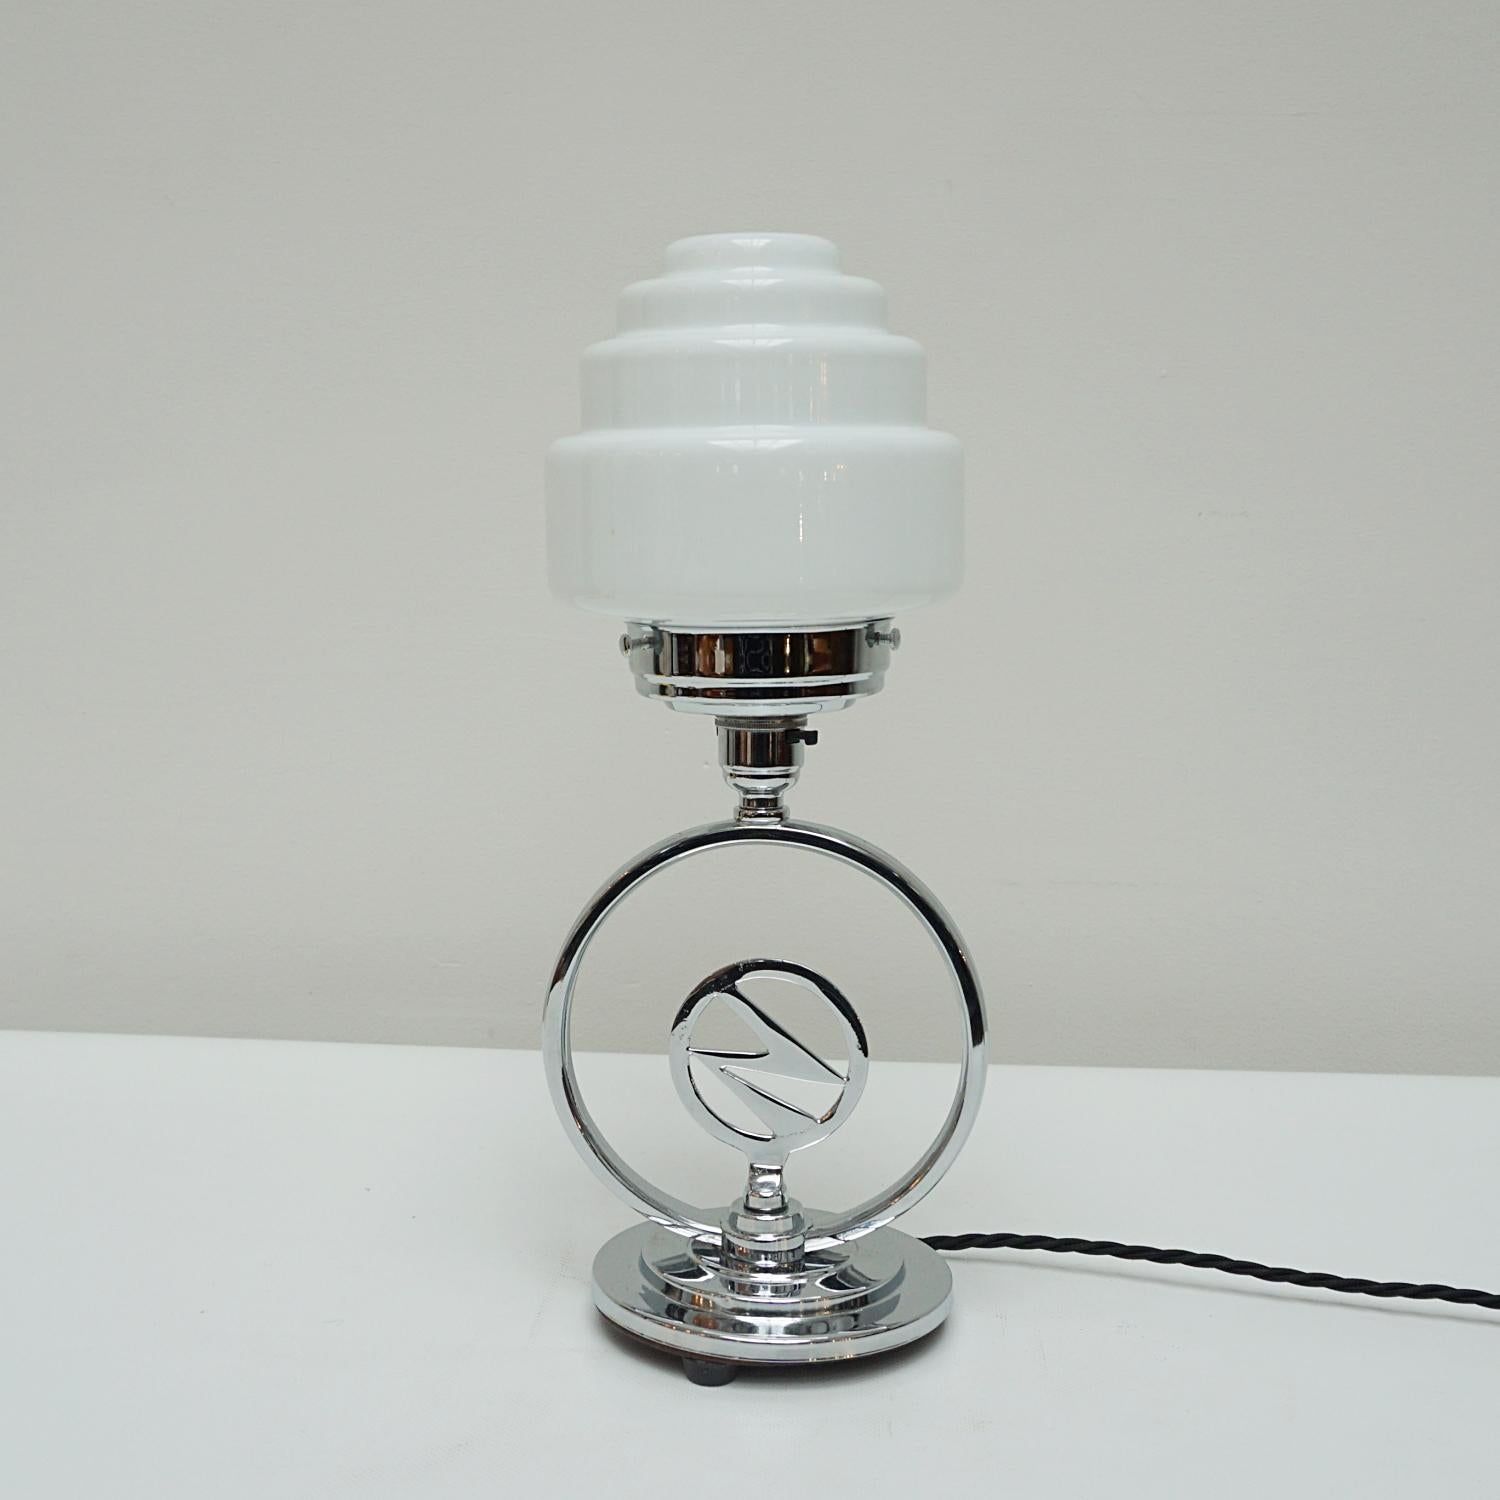 An Art Deco original table lamp. circular chromed stem centred around a lightning bolt. White glass globe shade.

Dimensions: H 37cm W 15cm 

Origin: English

Item Number: J316

All of our lighting is fully refurbished, re-wired, and re-chromed with